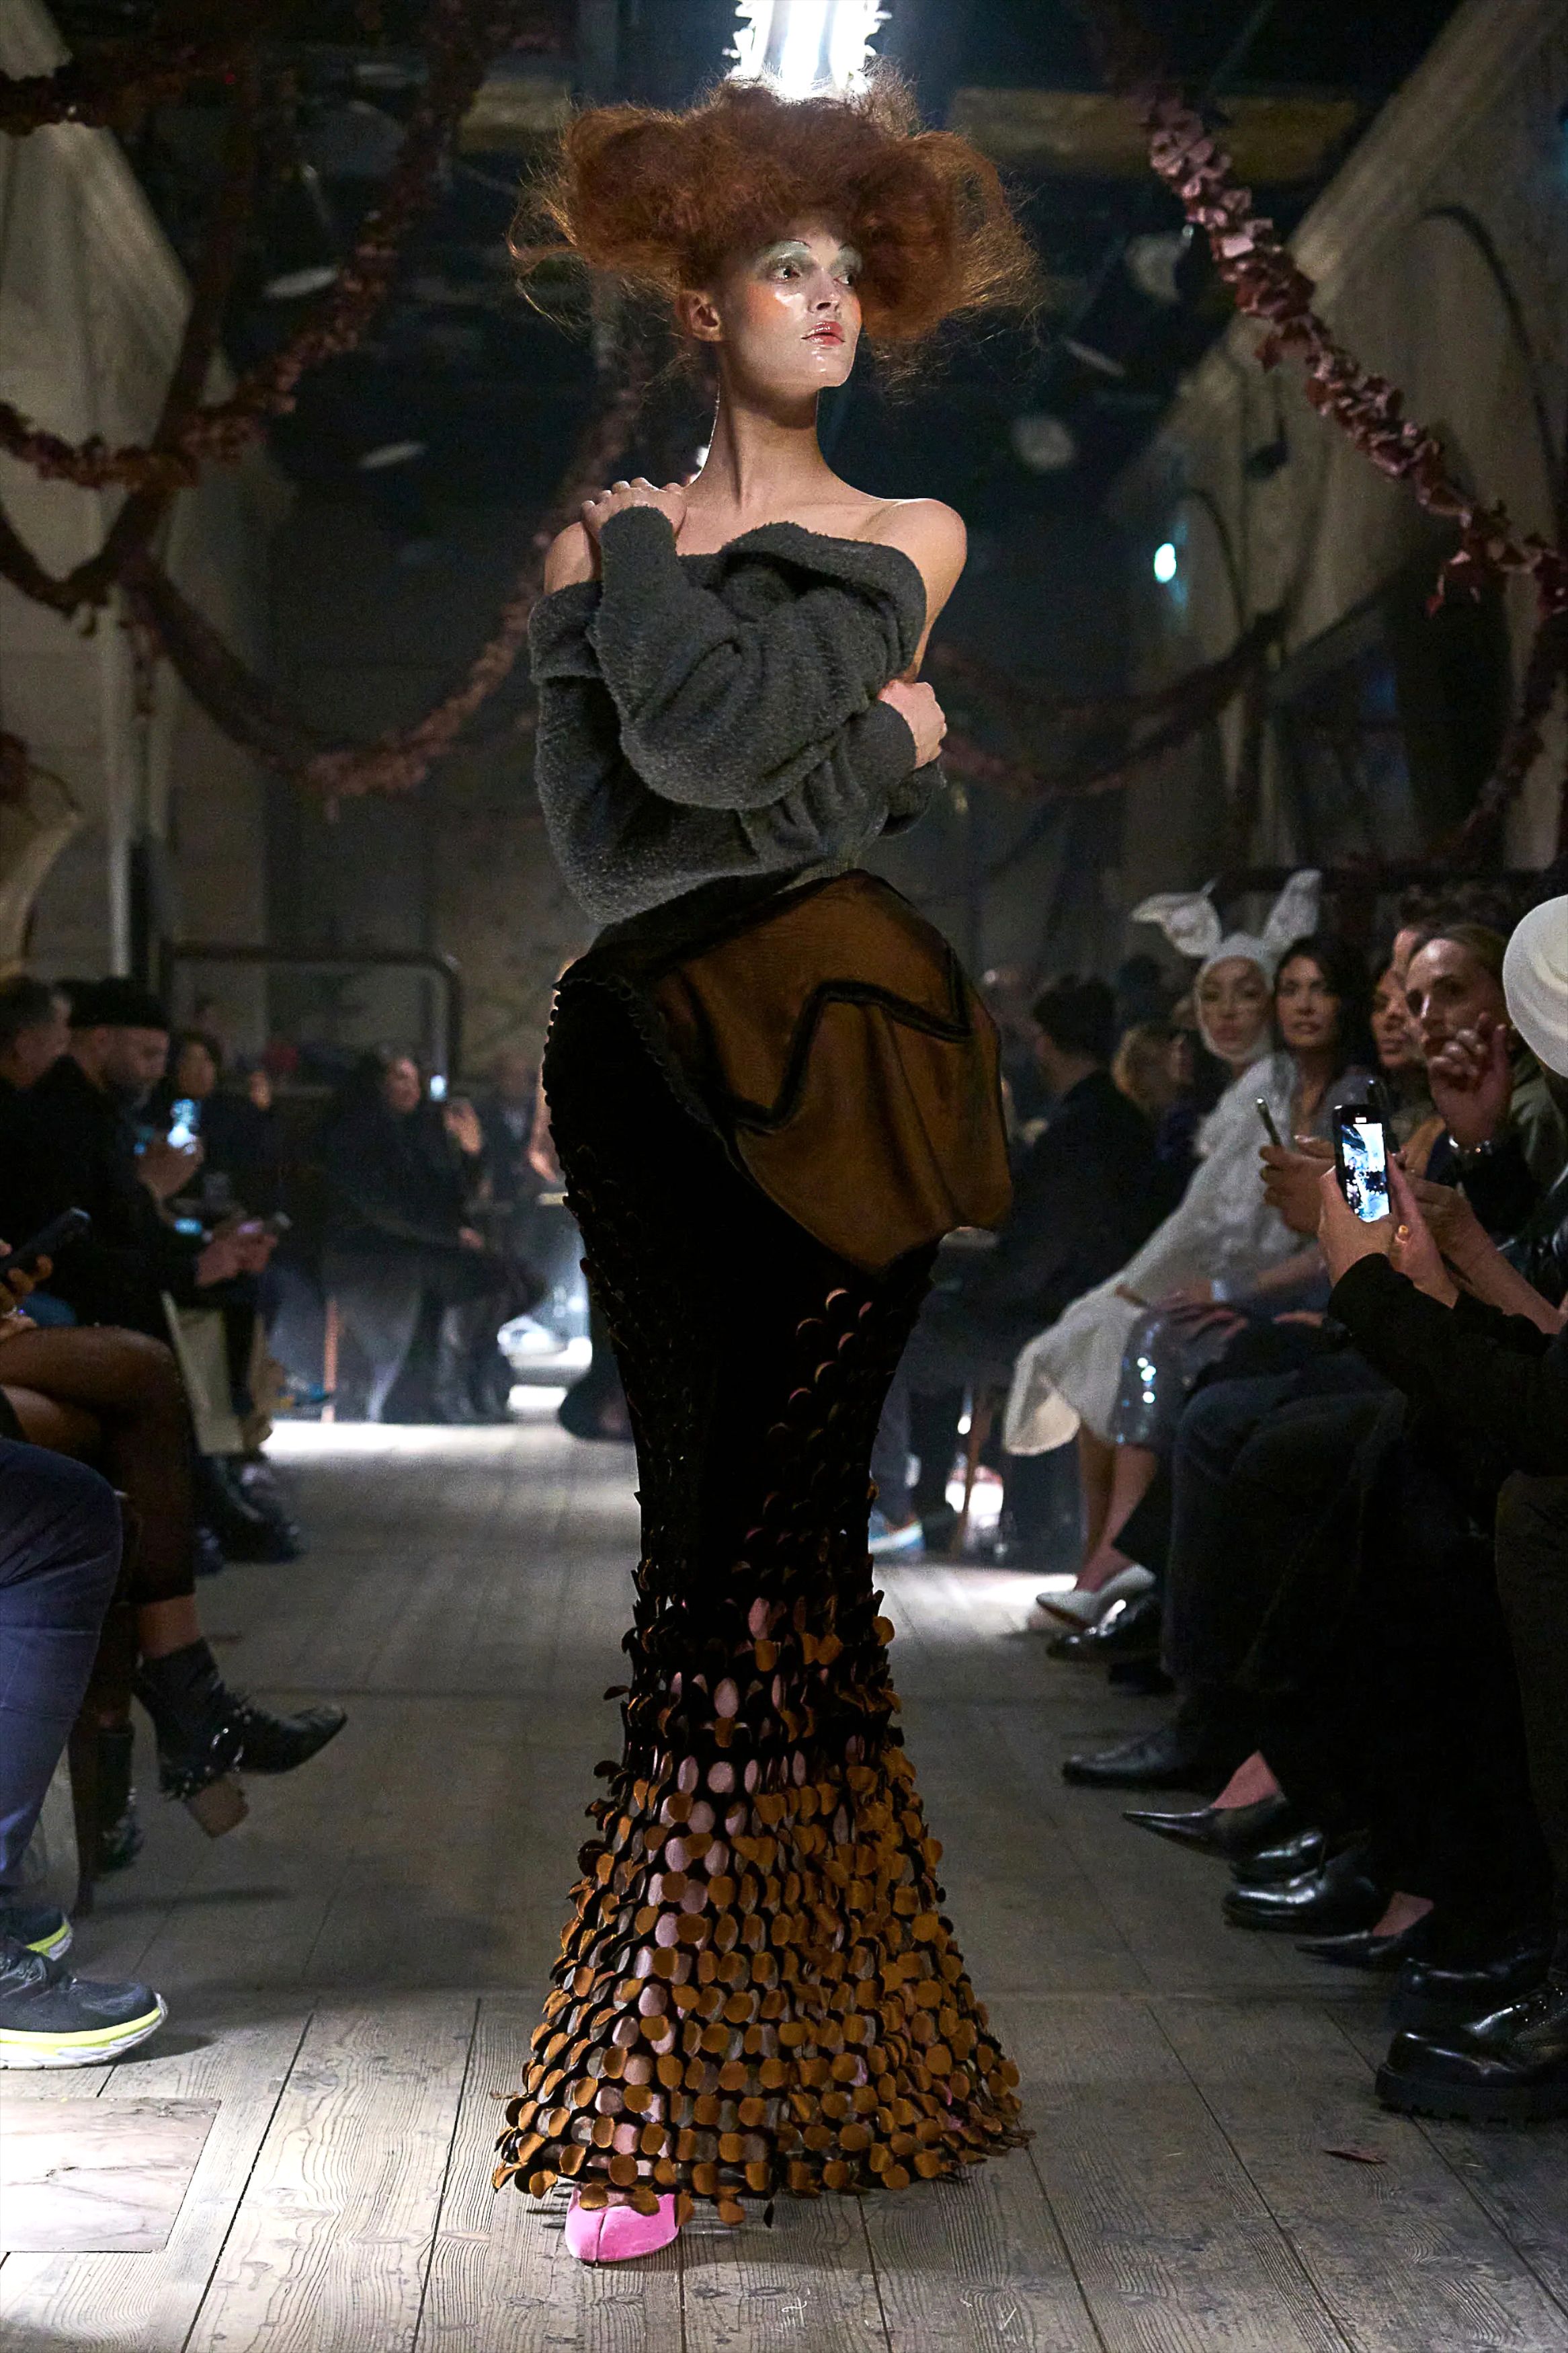 John Galliano's couture collection for Maison Margiela was fantastical and theatrical, fittingly taking place under the first full moon of the year.